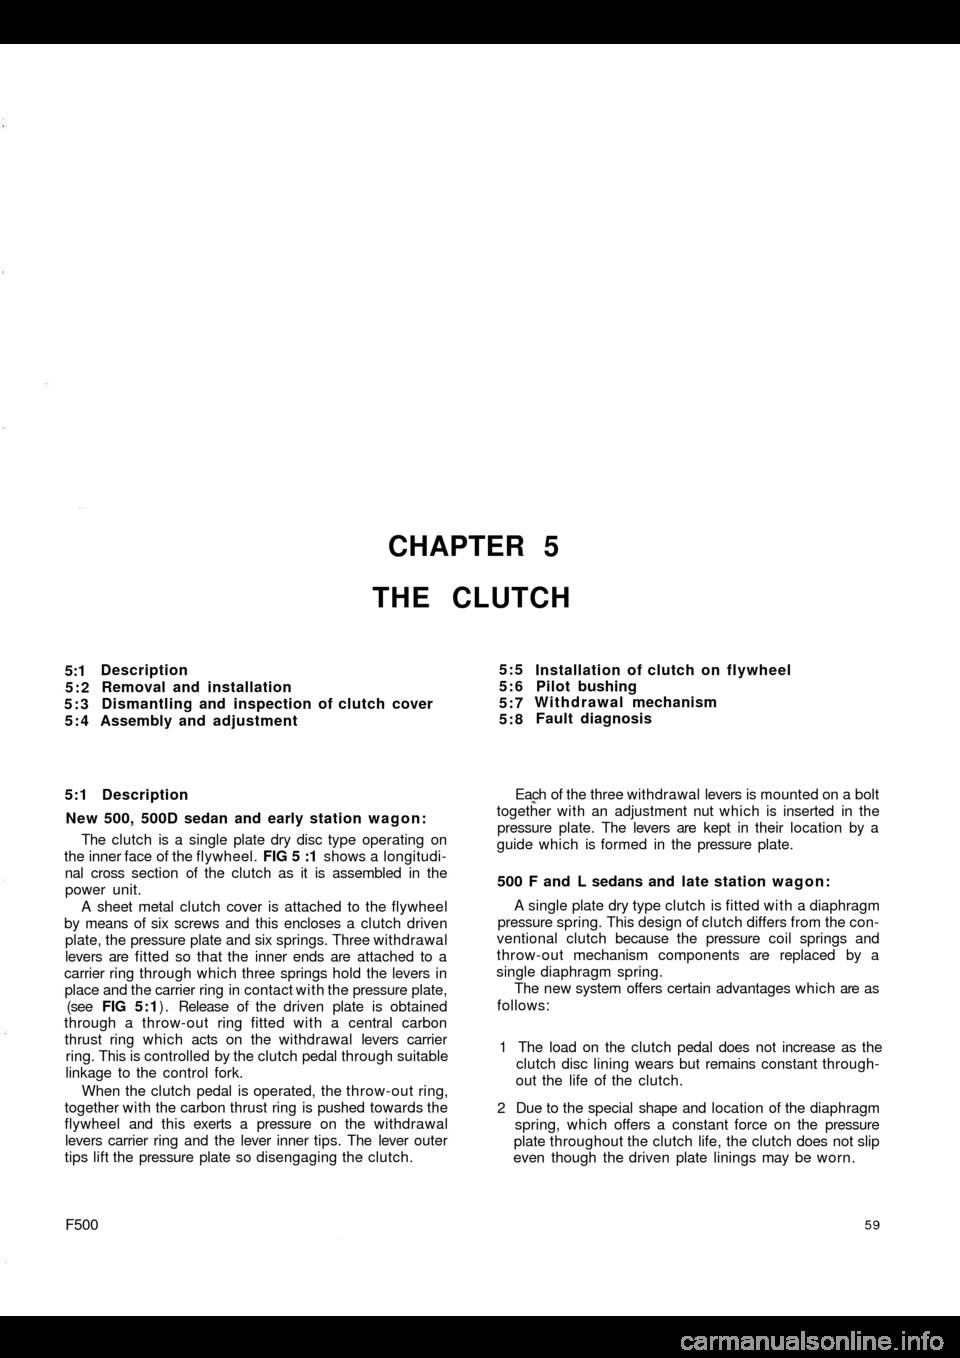 FIAT 500 1970 1.G Workshop Manual CHAPTER 5
THE CLUTCH
5:1
5:2
5:3
5:4Description
Removal and installation
Dismantling and inspection of clutch cover
Assembly and adjustment
5:1 Description
New 500, 500D sedan and early station wagon: